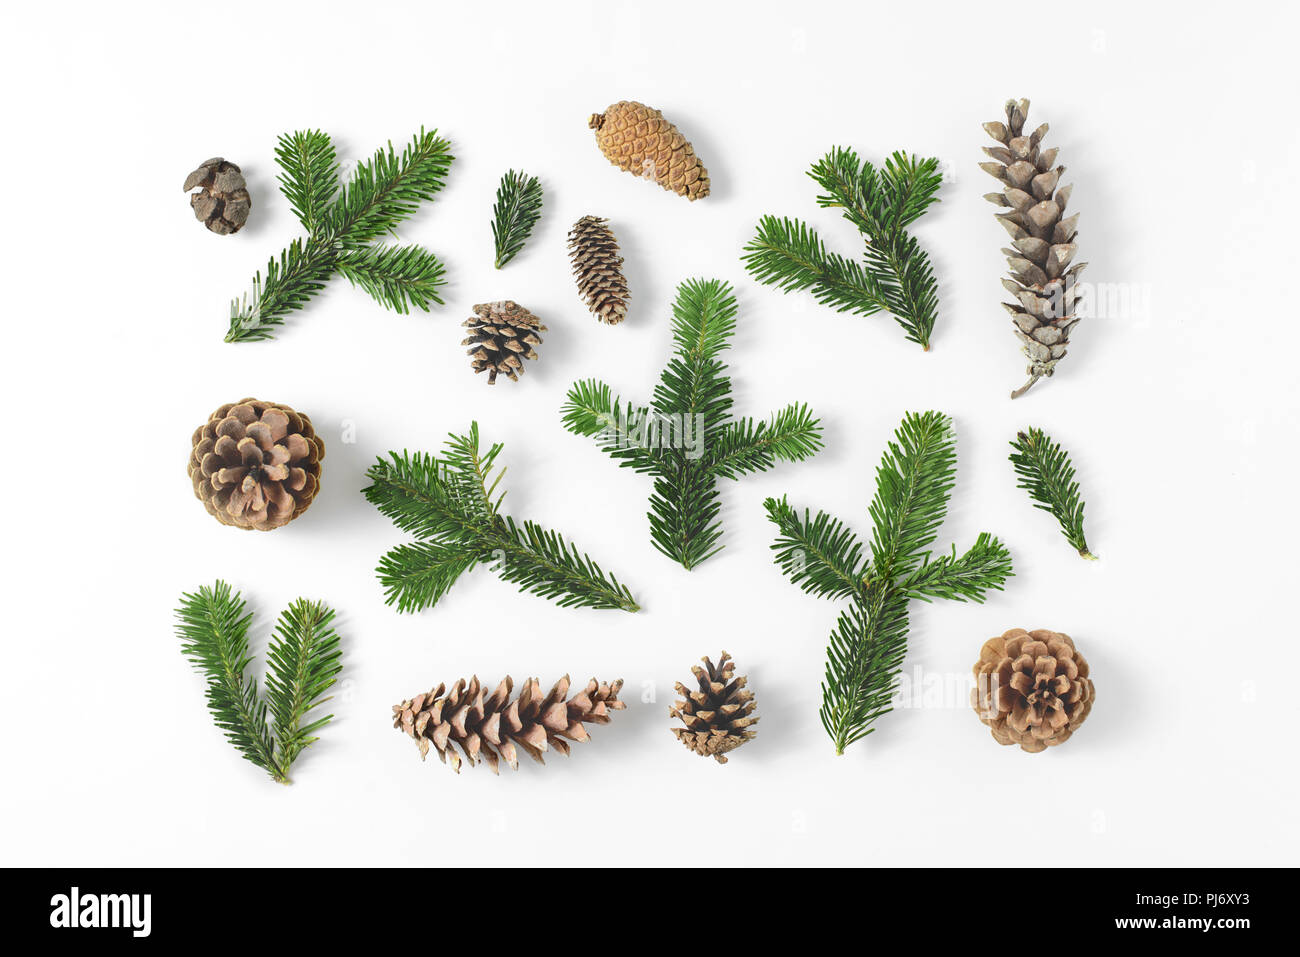 Set of various pine and fir-tree evergreen branches and cones on white background. Natural rustic background. Top view, flat lay. Stock Photo